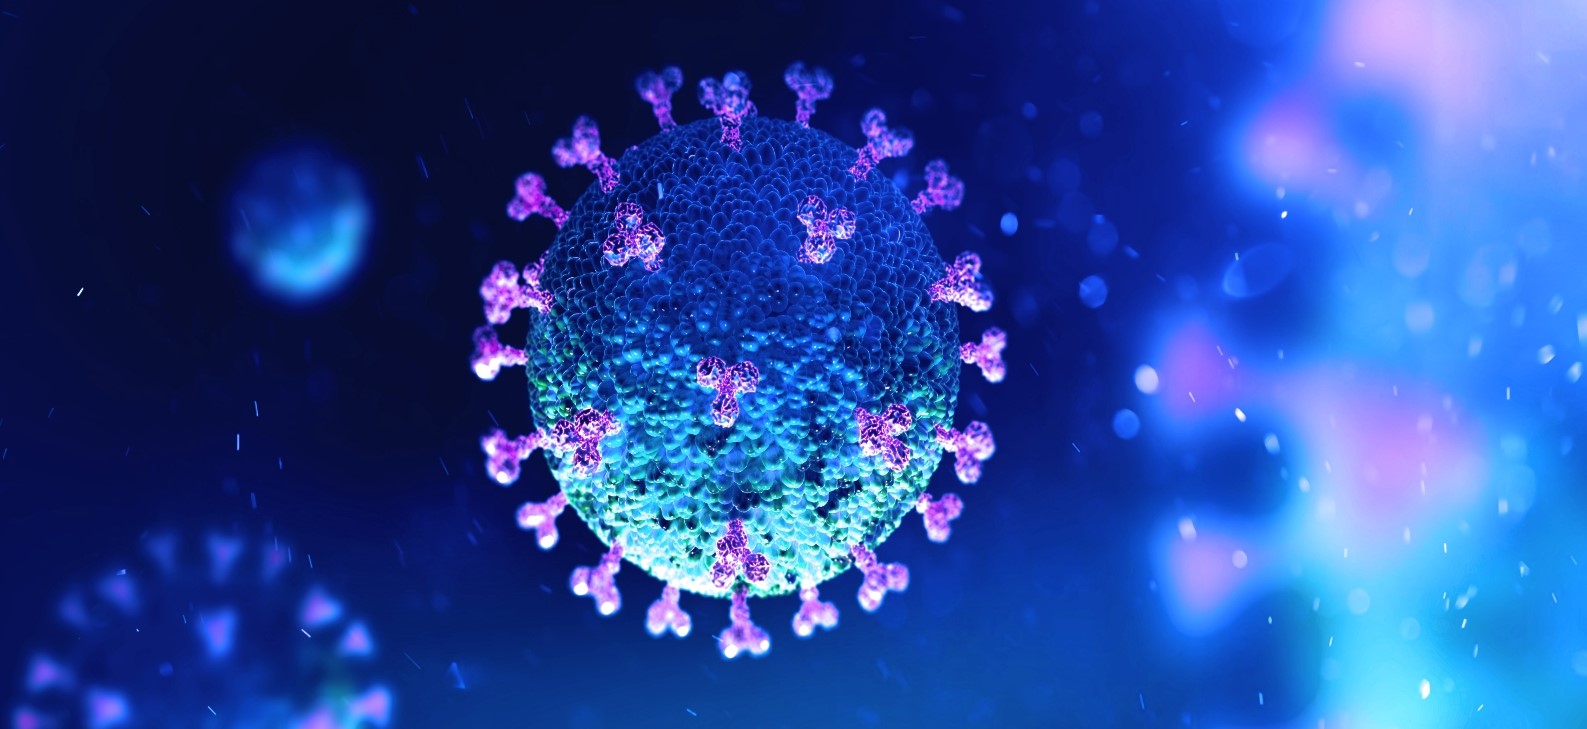 Virus depicted in turquoise and light blue against dark blue background